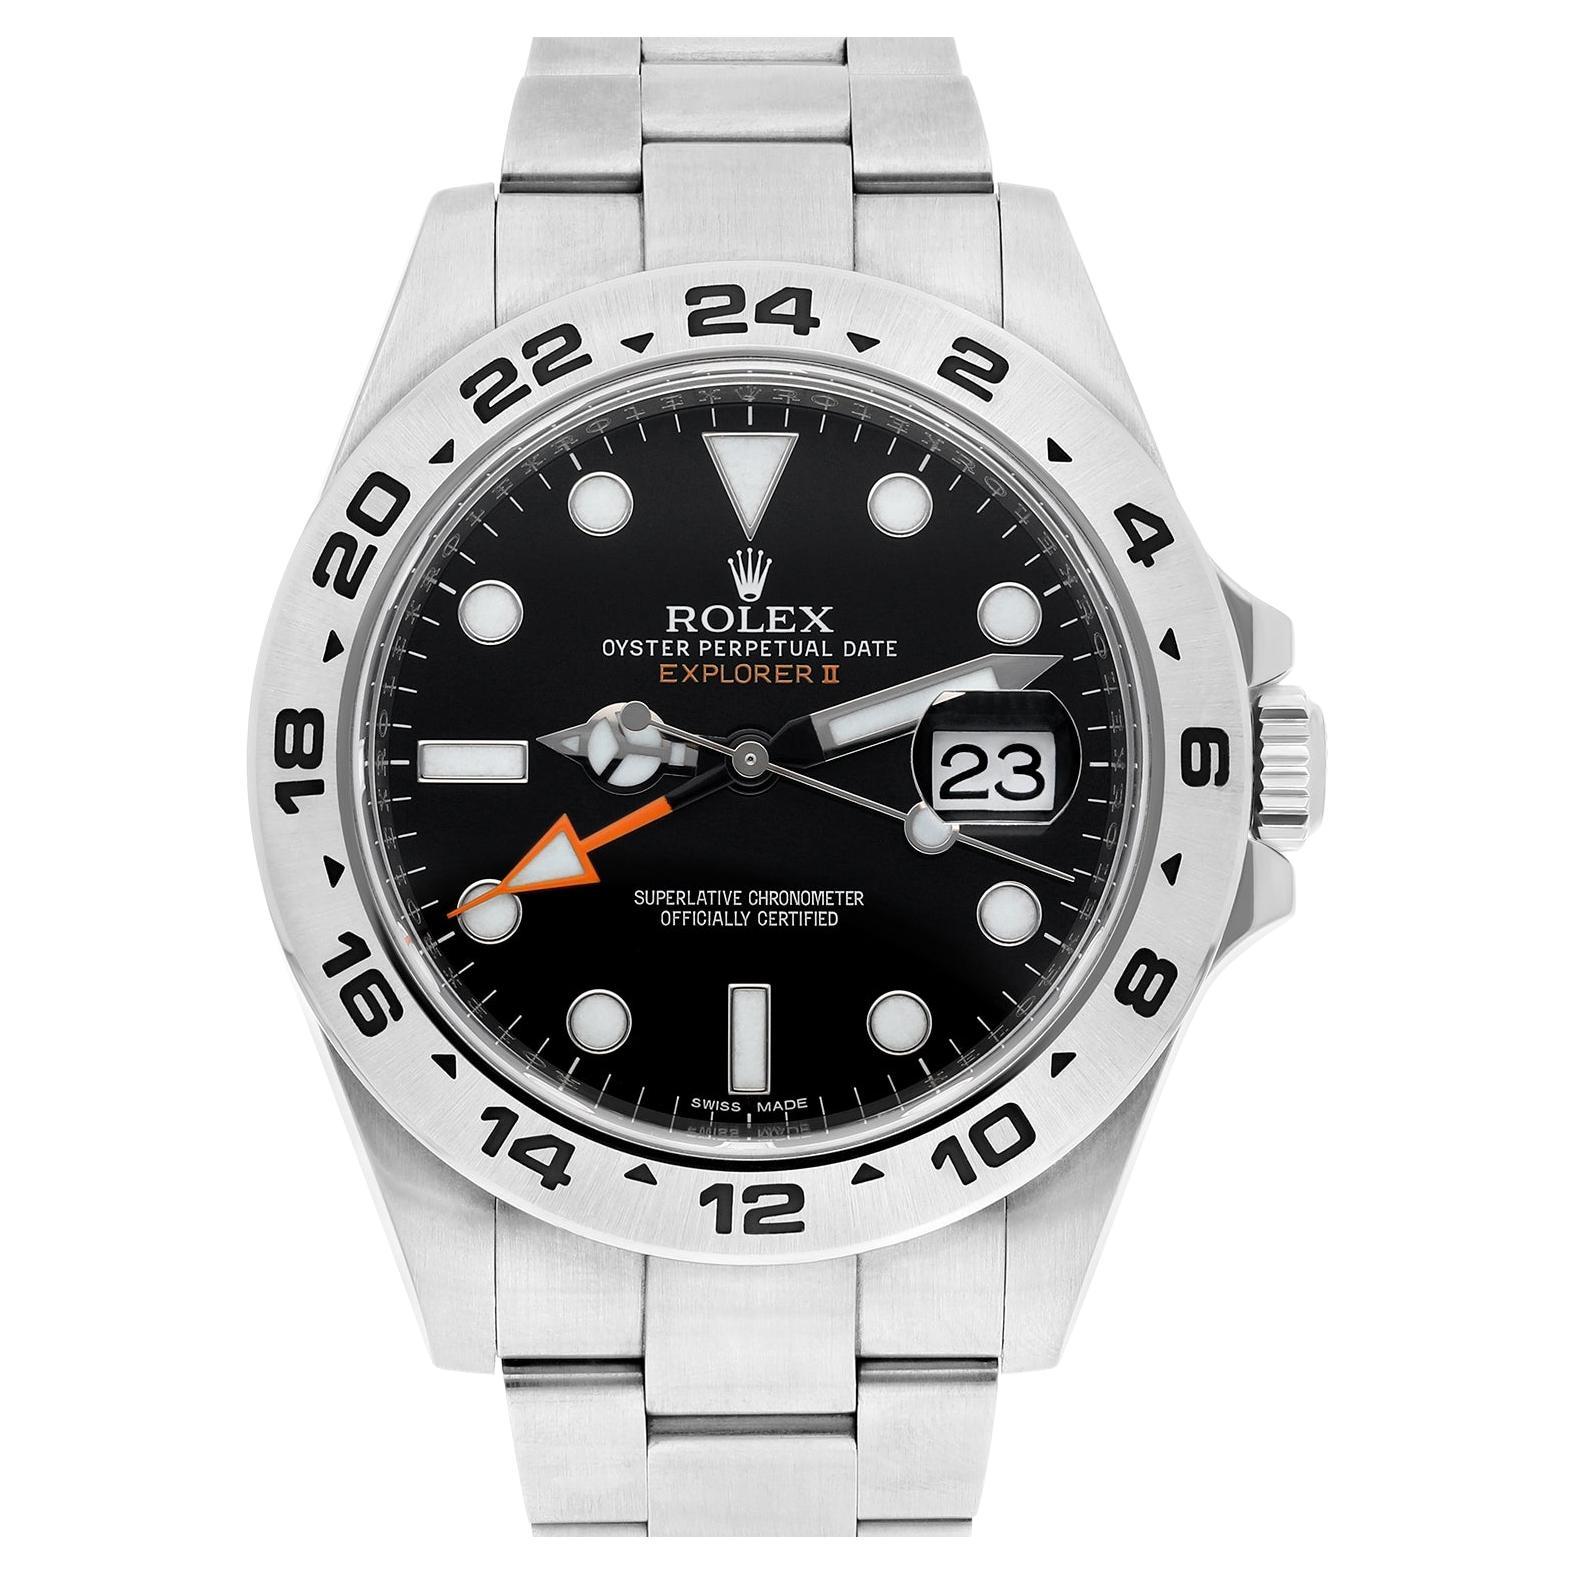 How do I adjust the time on a Rolex Oyster Perpetual?